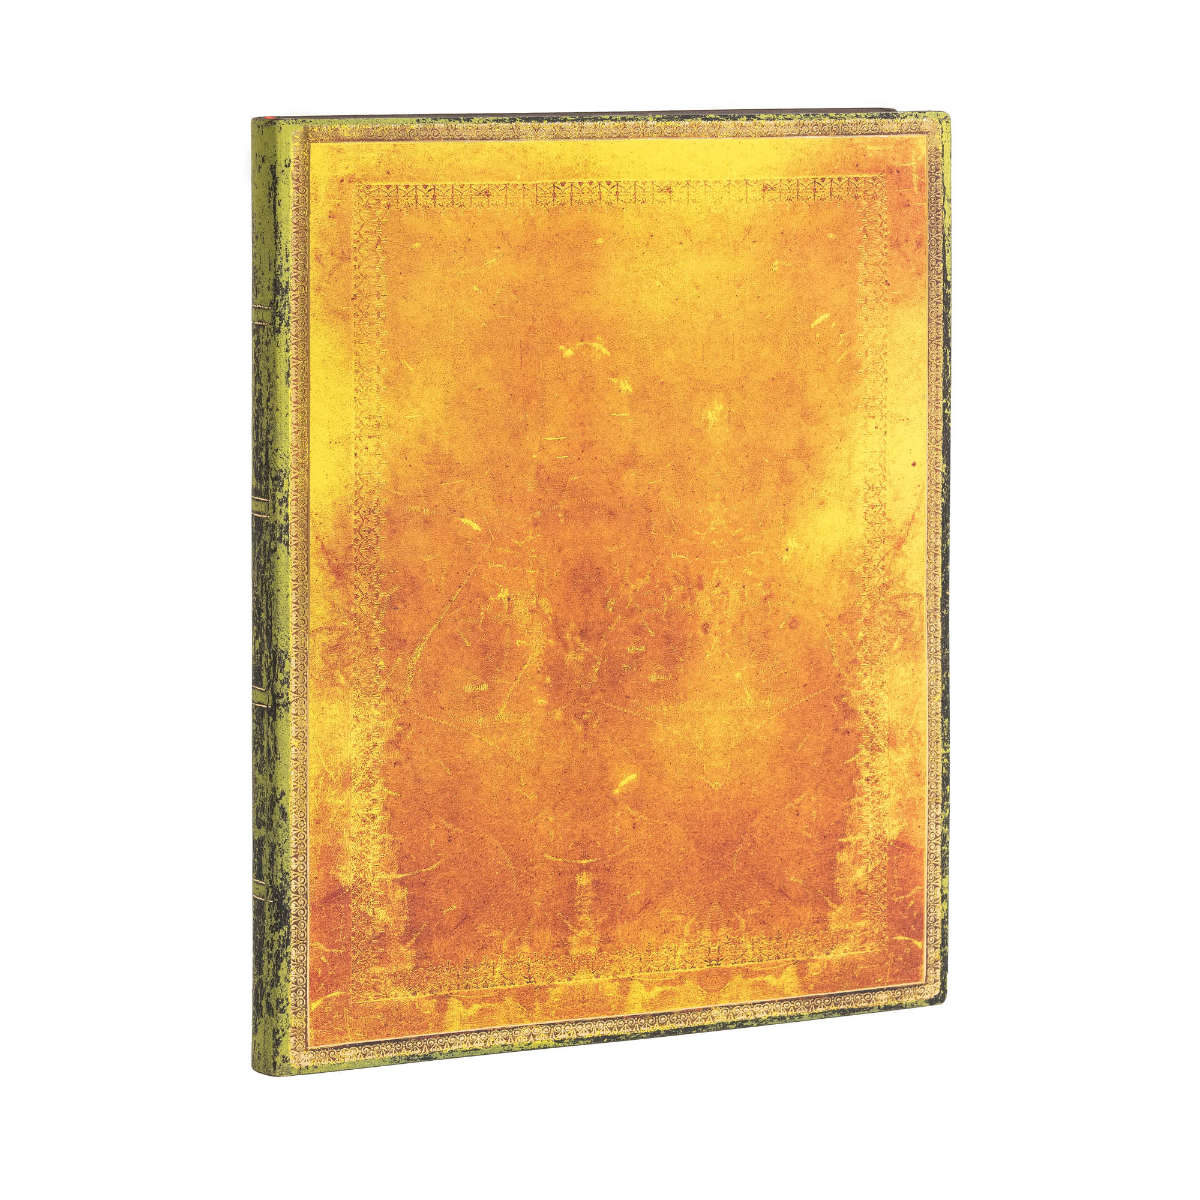 Paperblanks Flexis Old Leather Ochre Ultra 7x9 Inch 240 Pages